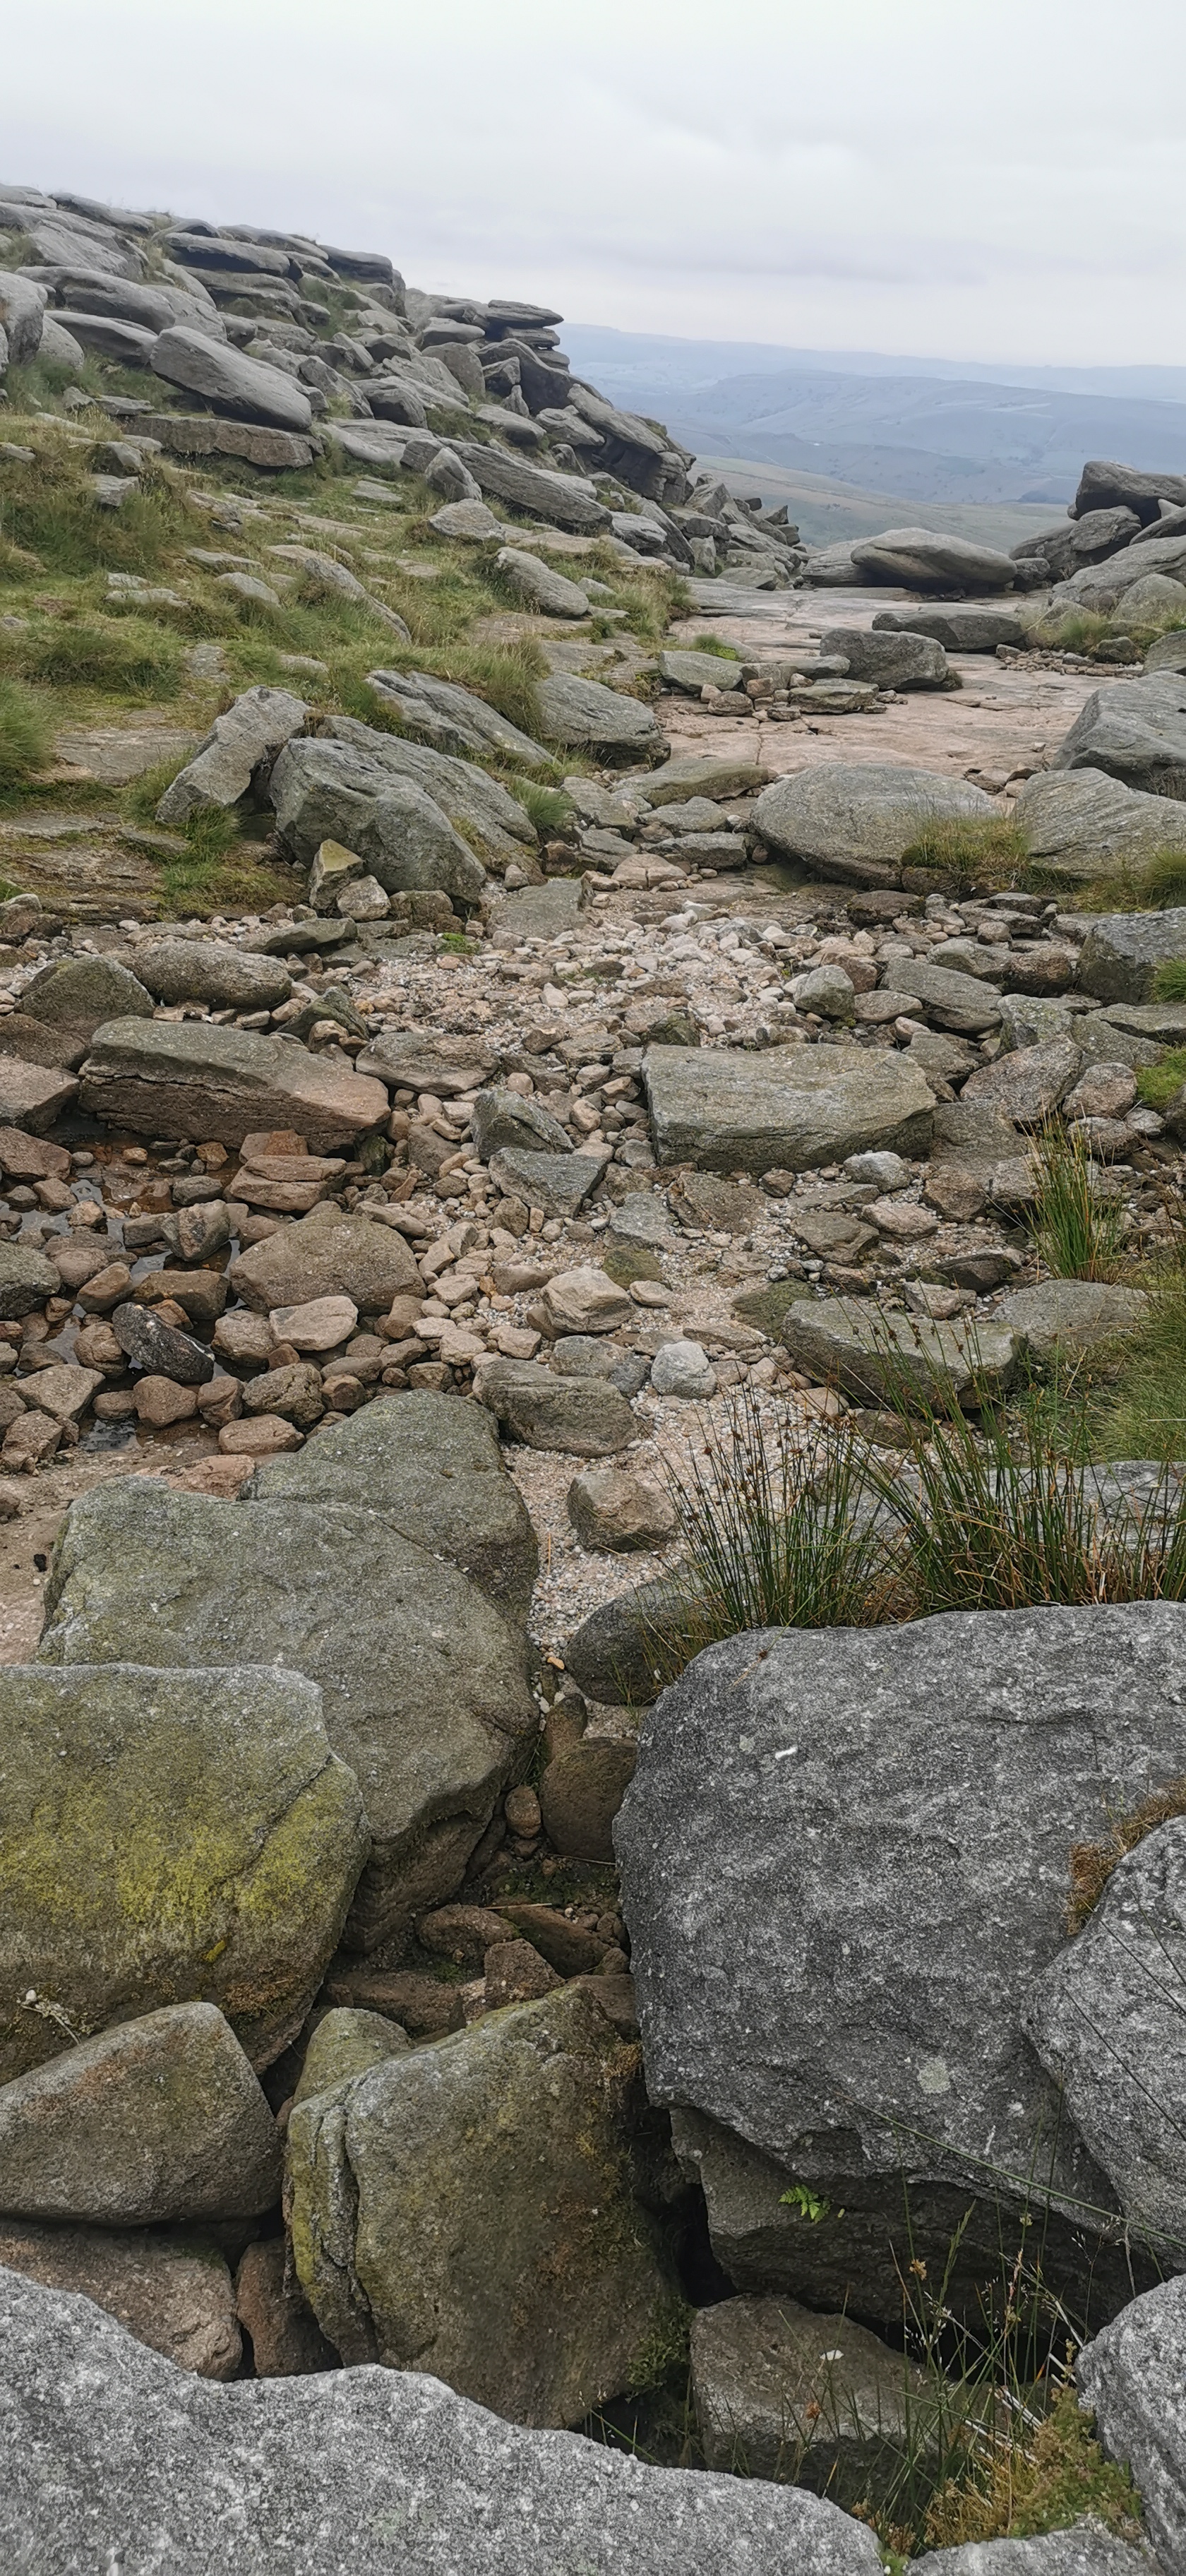 Photo taken between Mill Hill and Kinder Downfall